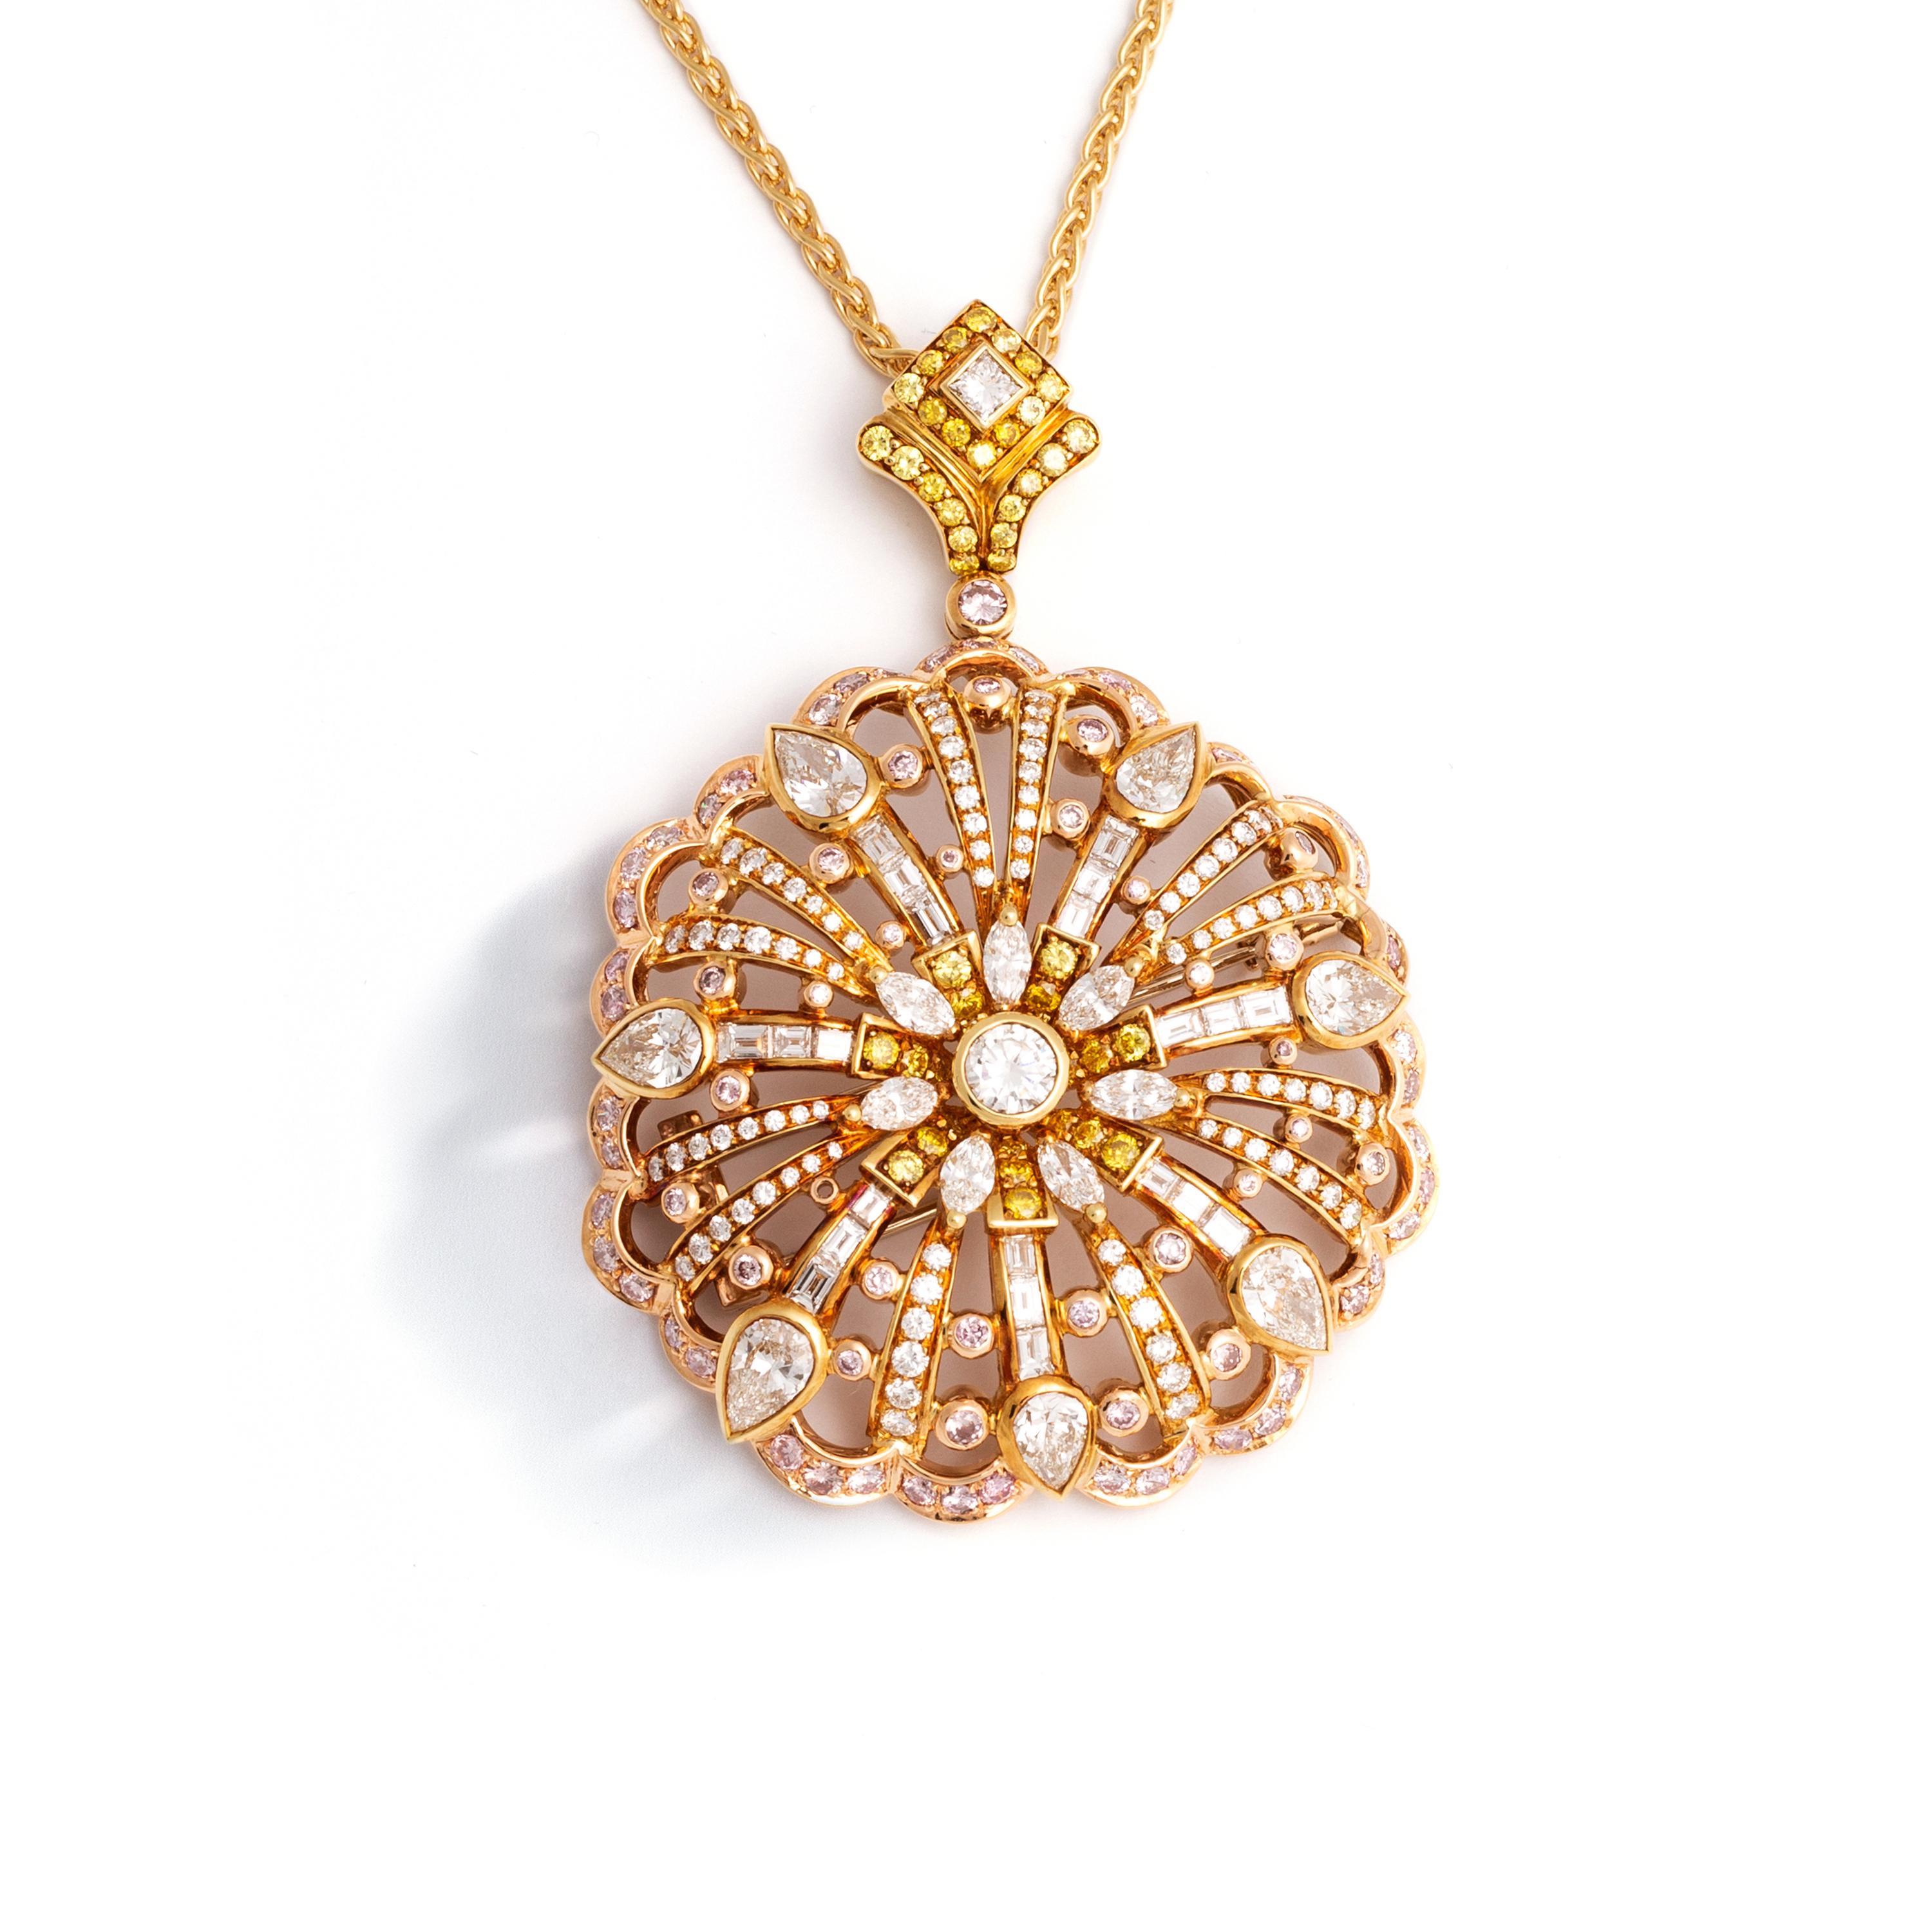 Round Cut Diamond Pendant Necklace Convertible Brooch For Sale